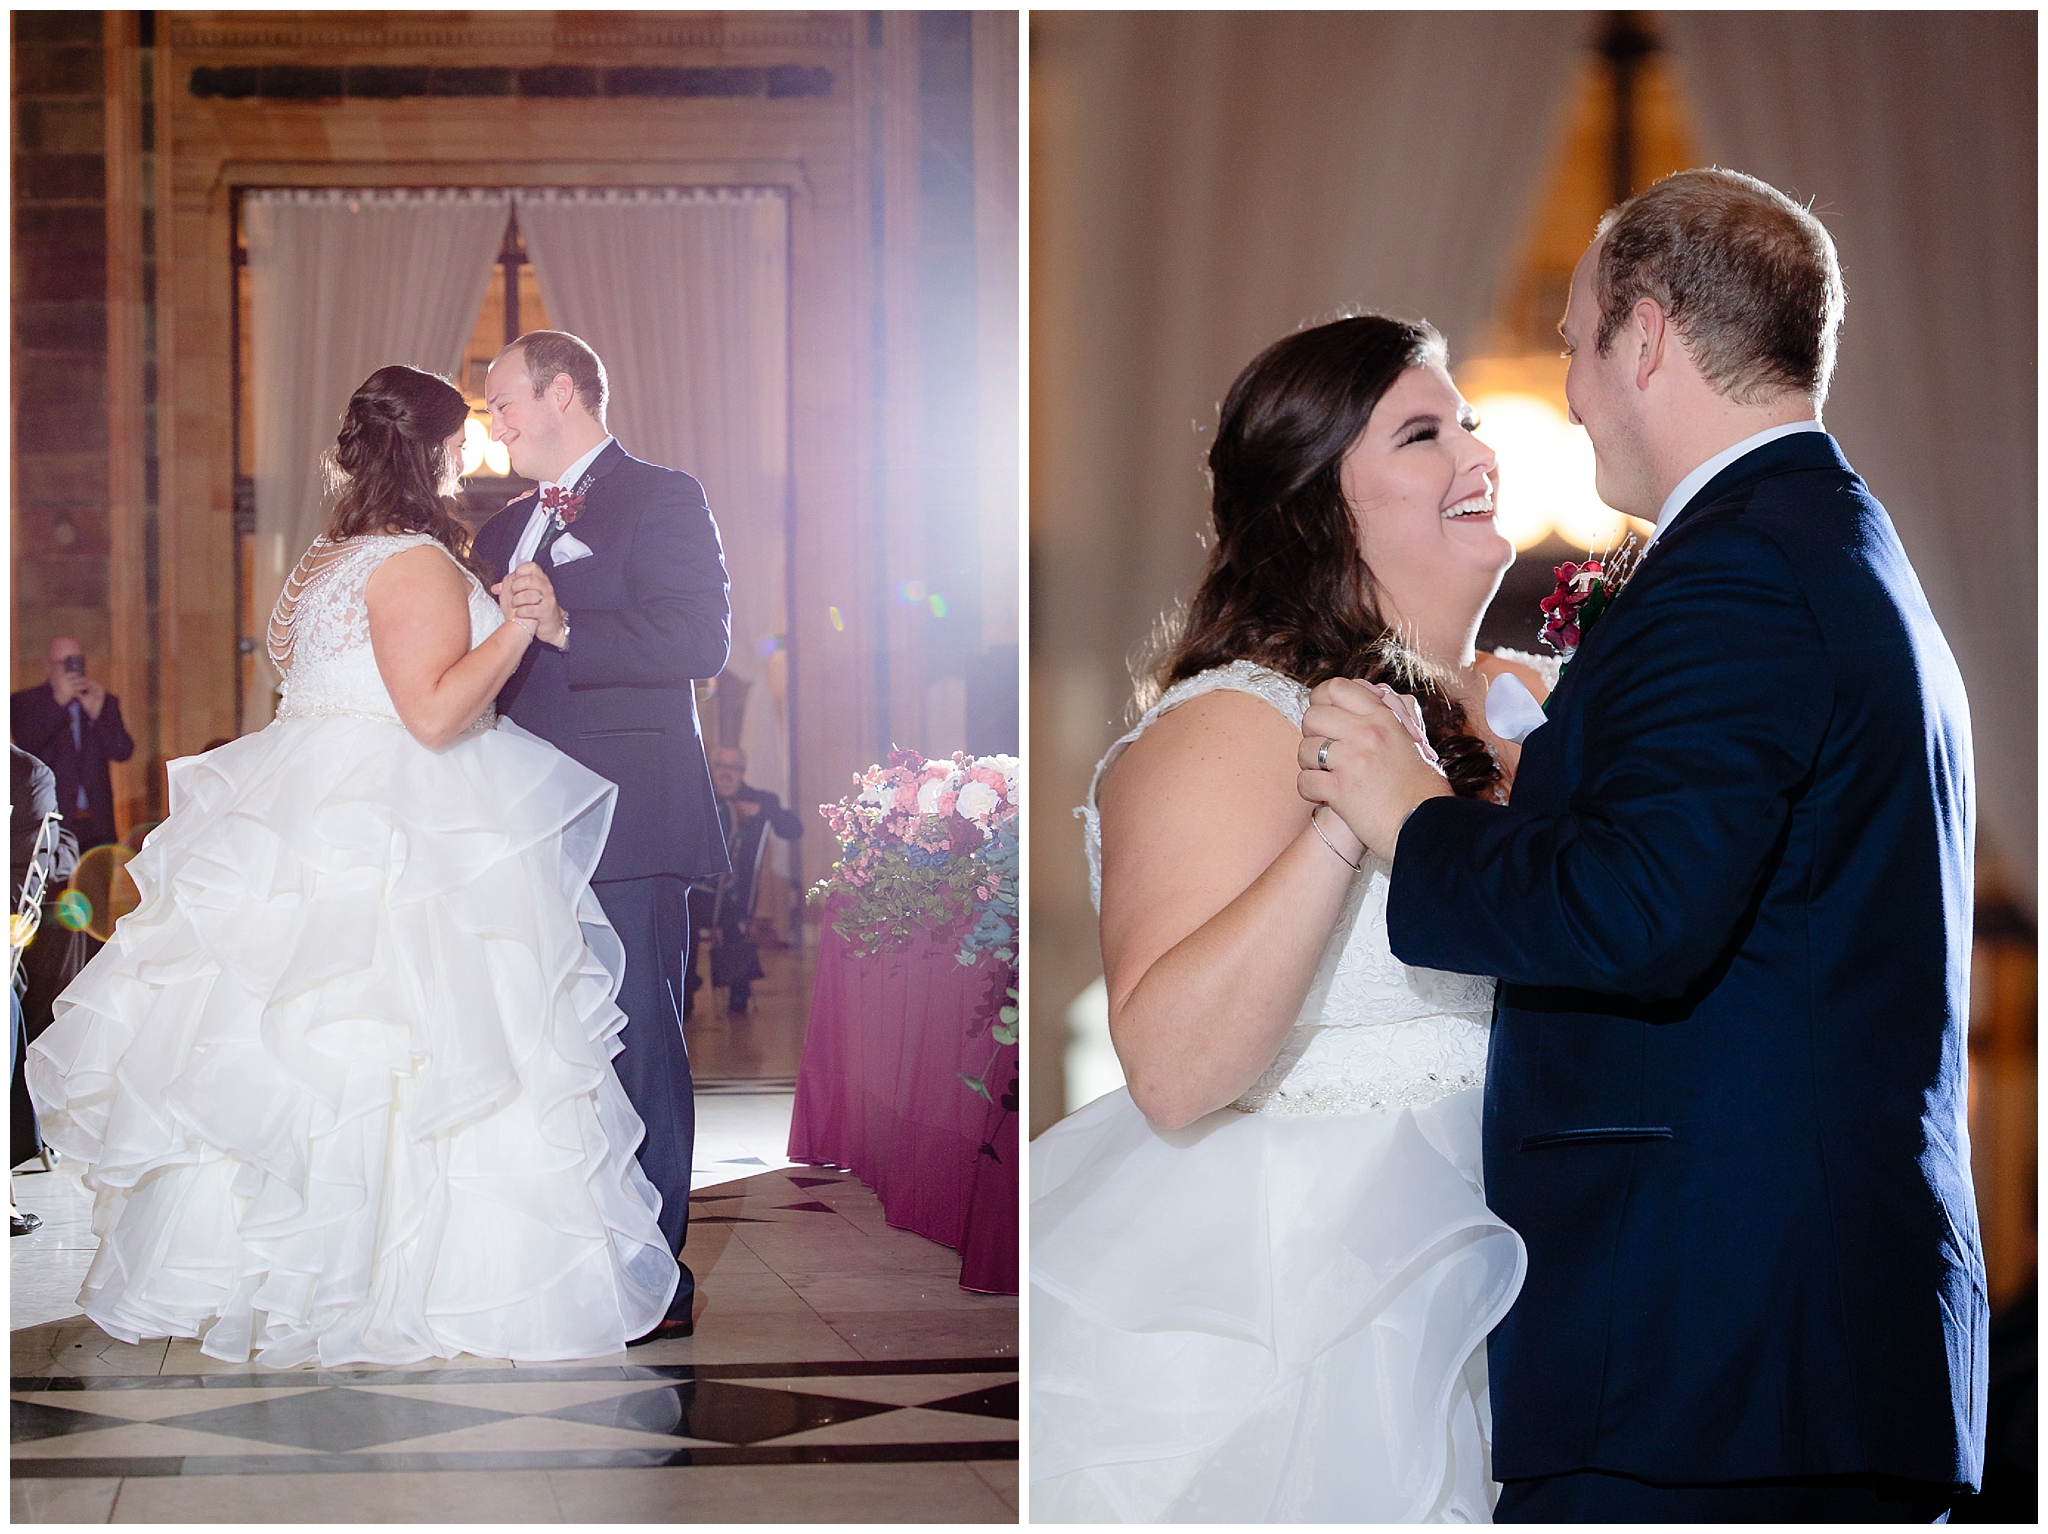 Bride and groom first dance at the Pennsylvanian wedding reception